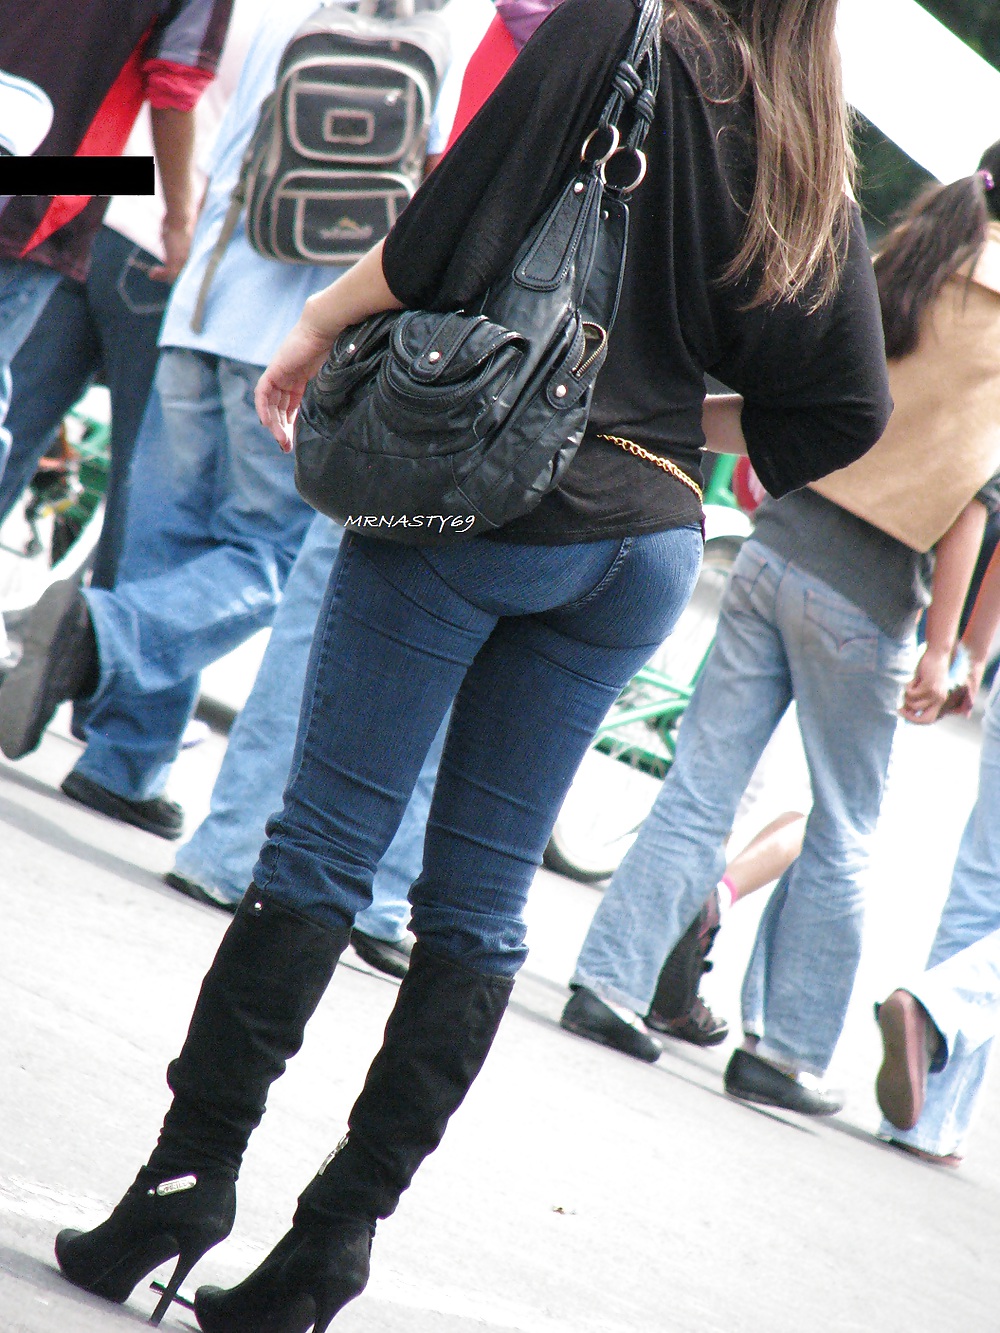 Wife In Tight Jeans #12 #13363018